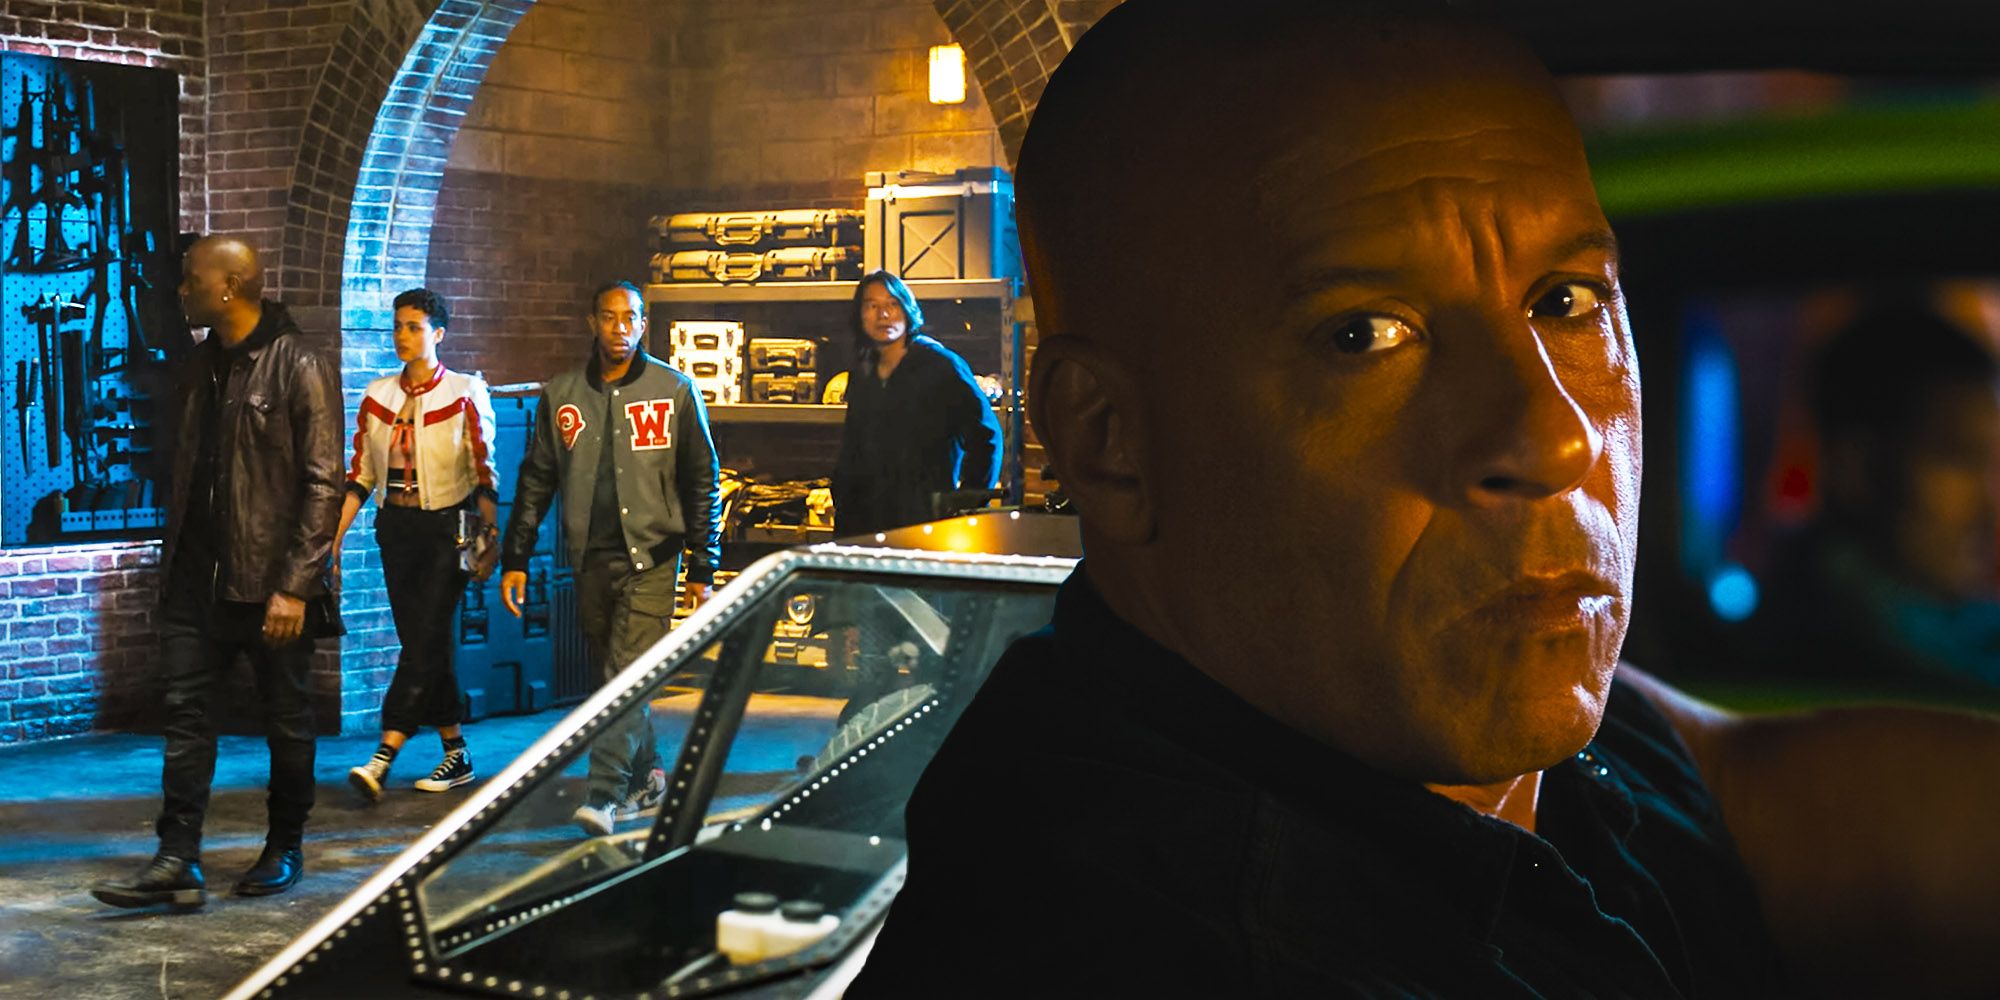 4 Biggest Signs Of Fast & Furious 10’s Behind-The-Scenes Drama In The Finished Movie